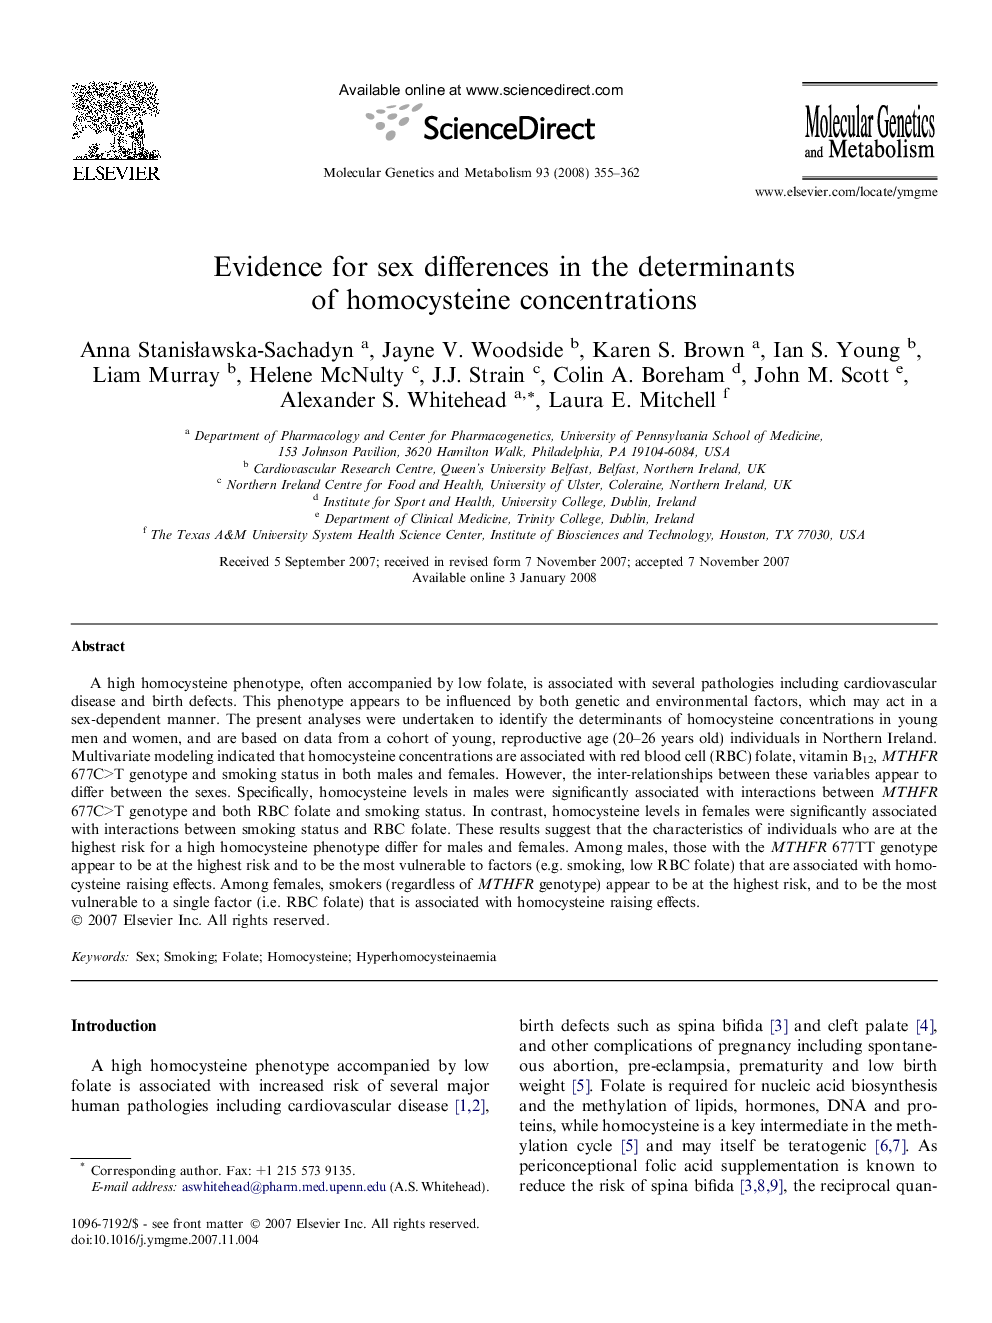 Evidence for sex differences in the determinants of homocysteine concentrations